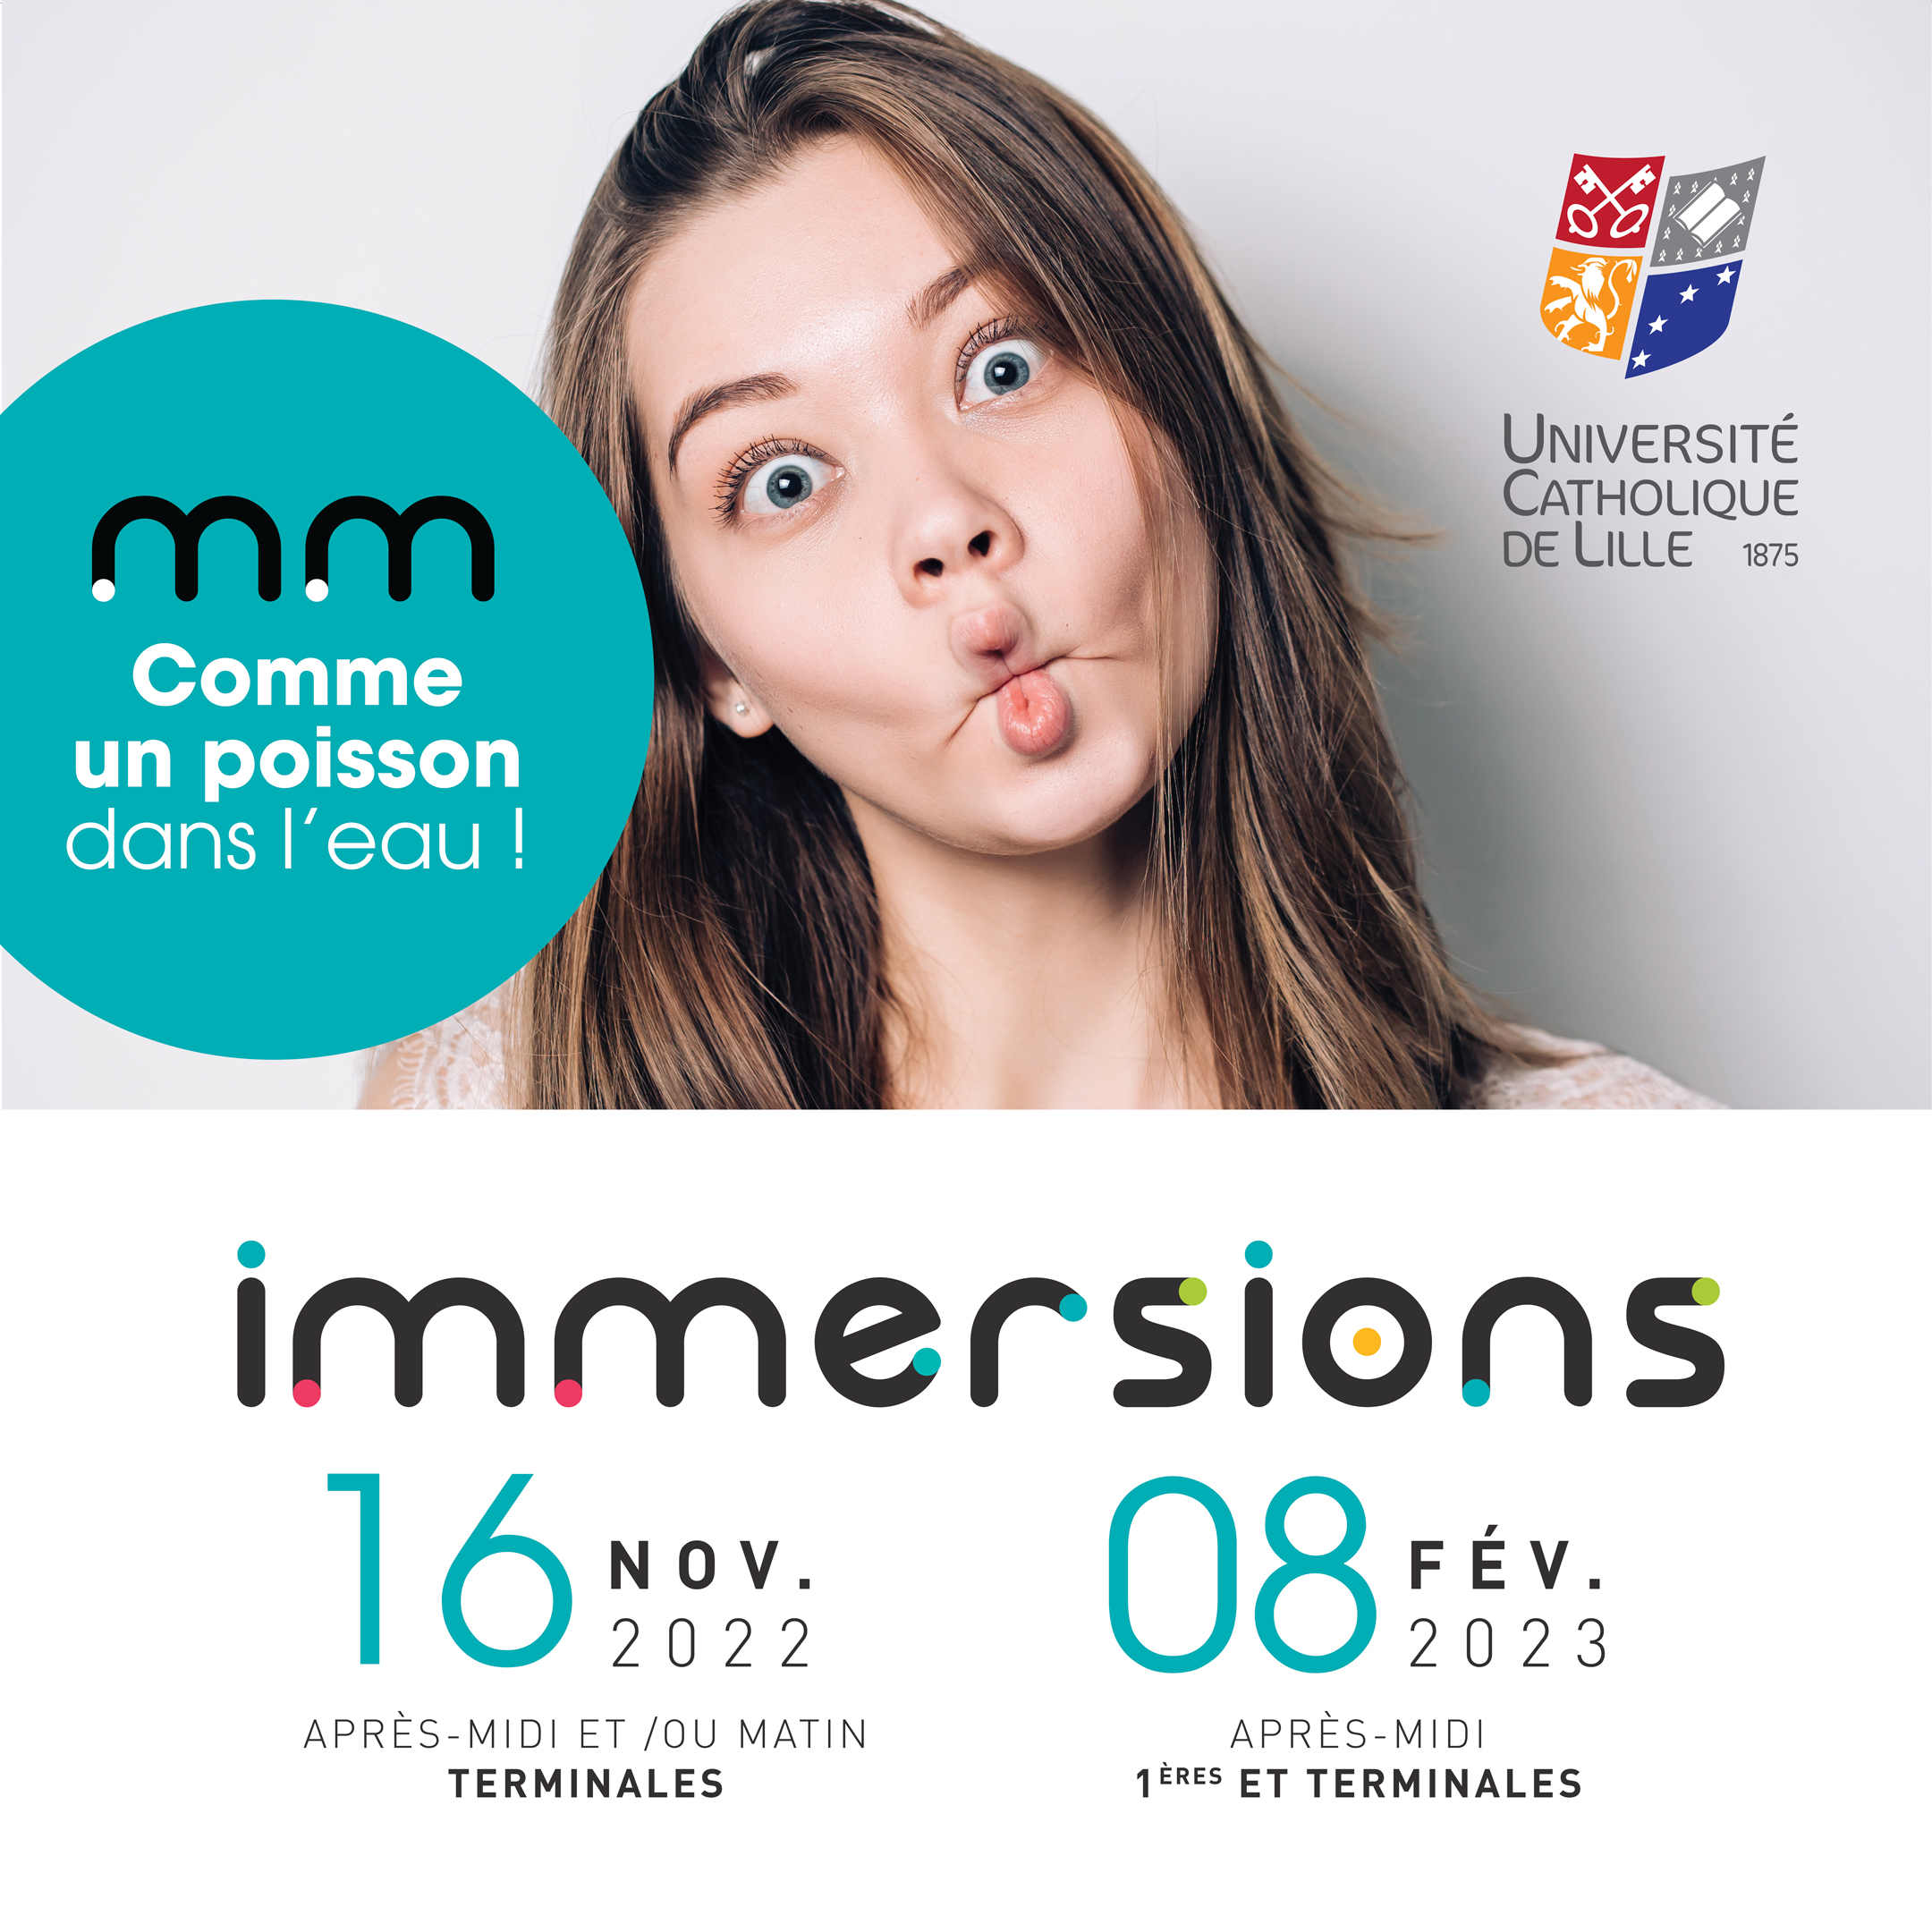 immersions lycéens 22-23